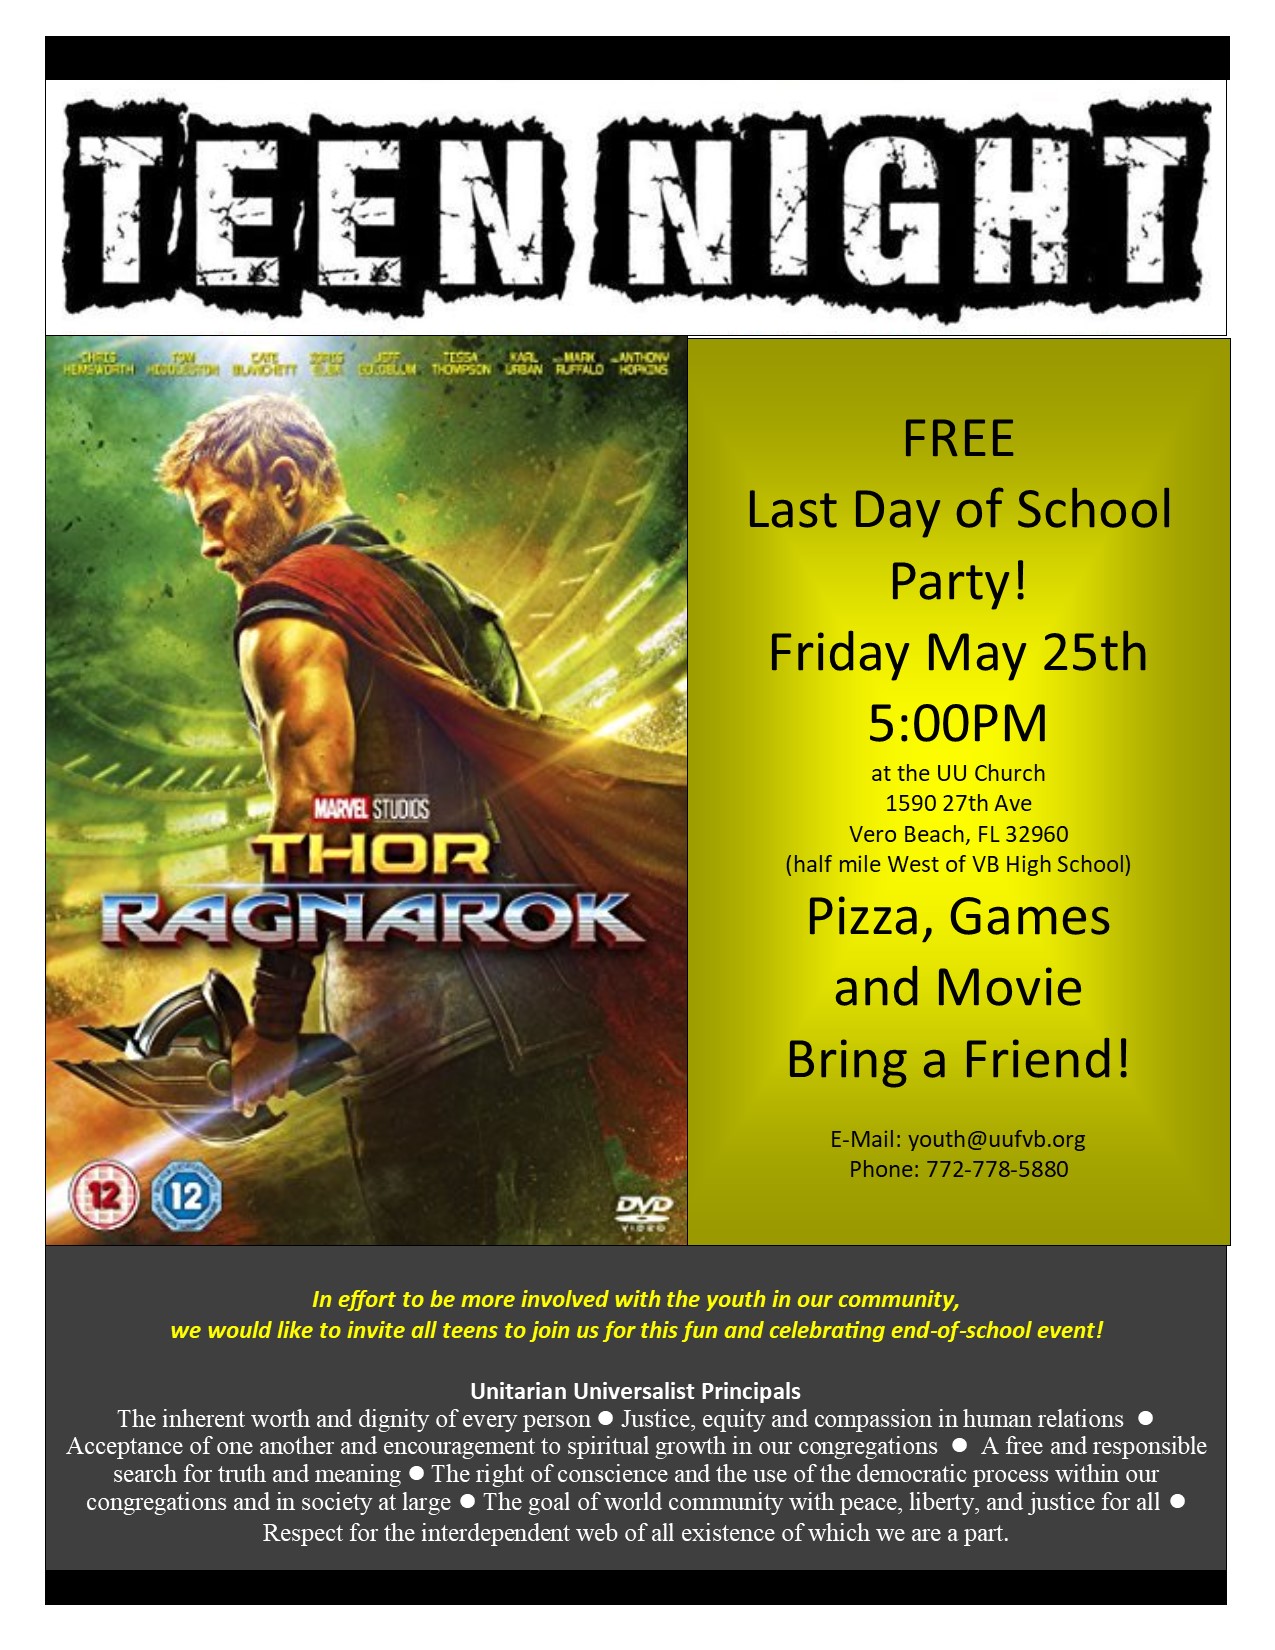 Our Free Teen Nights